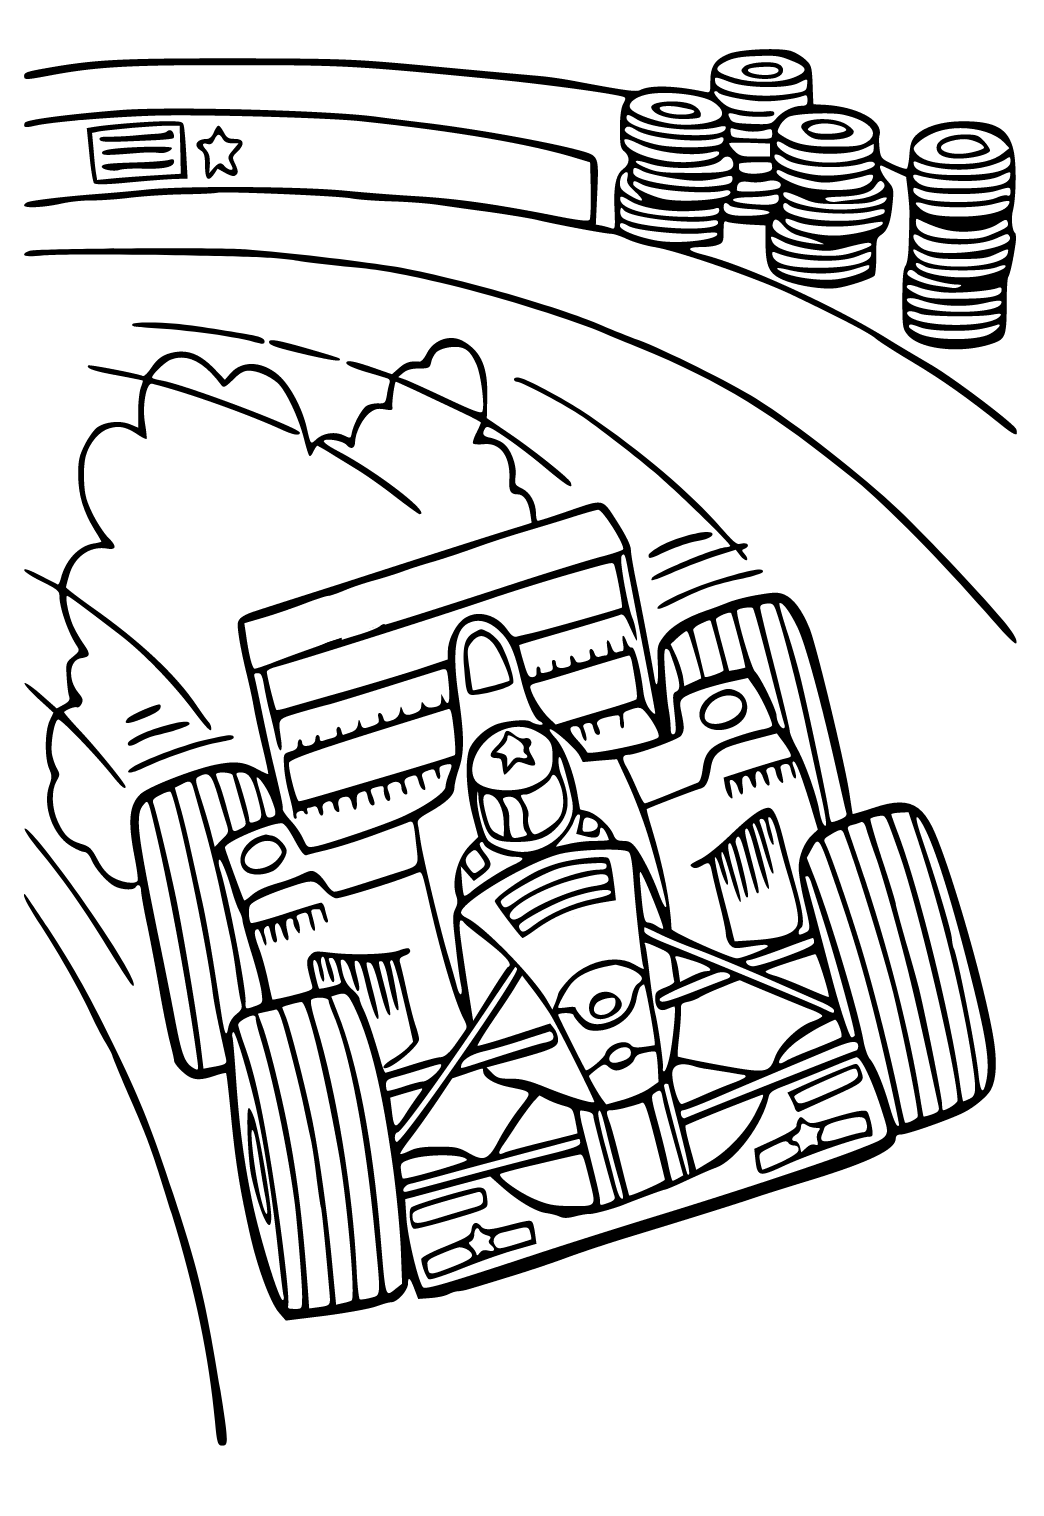 Free printable race car track coloring page for adults and kids